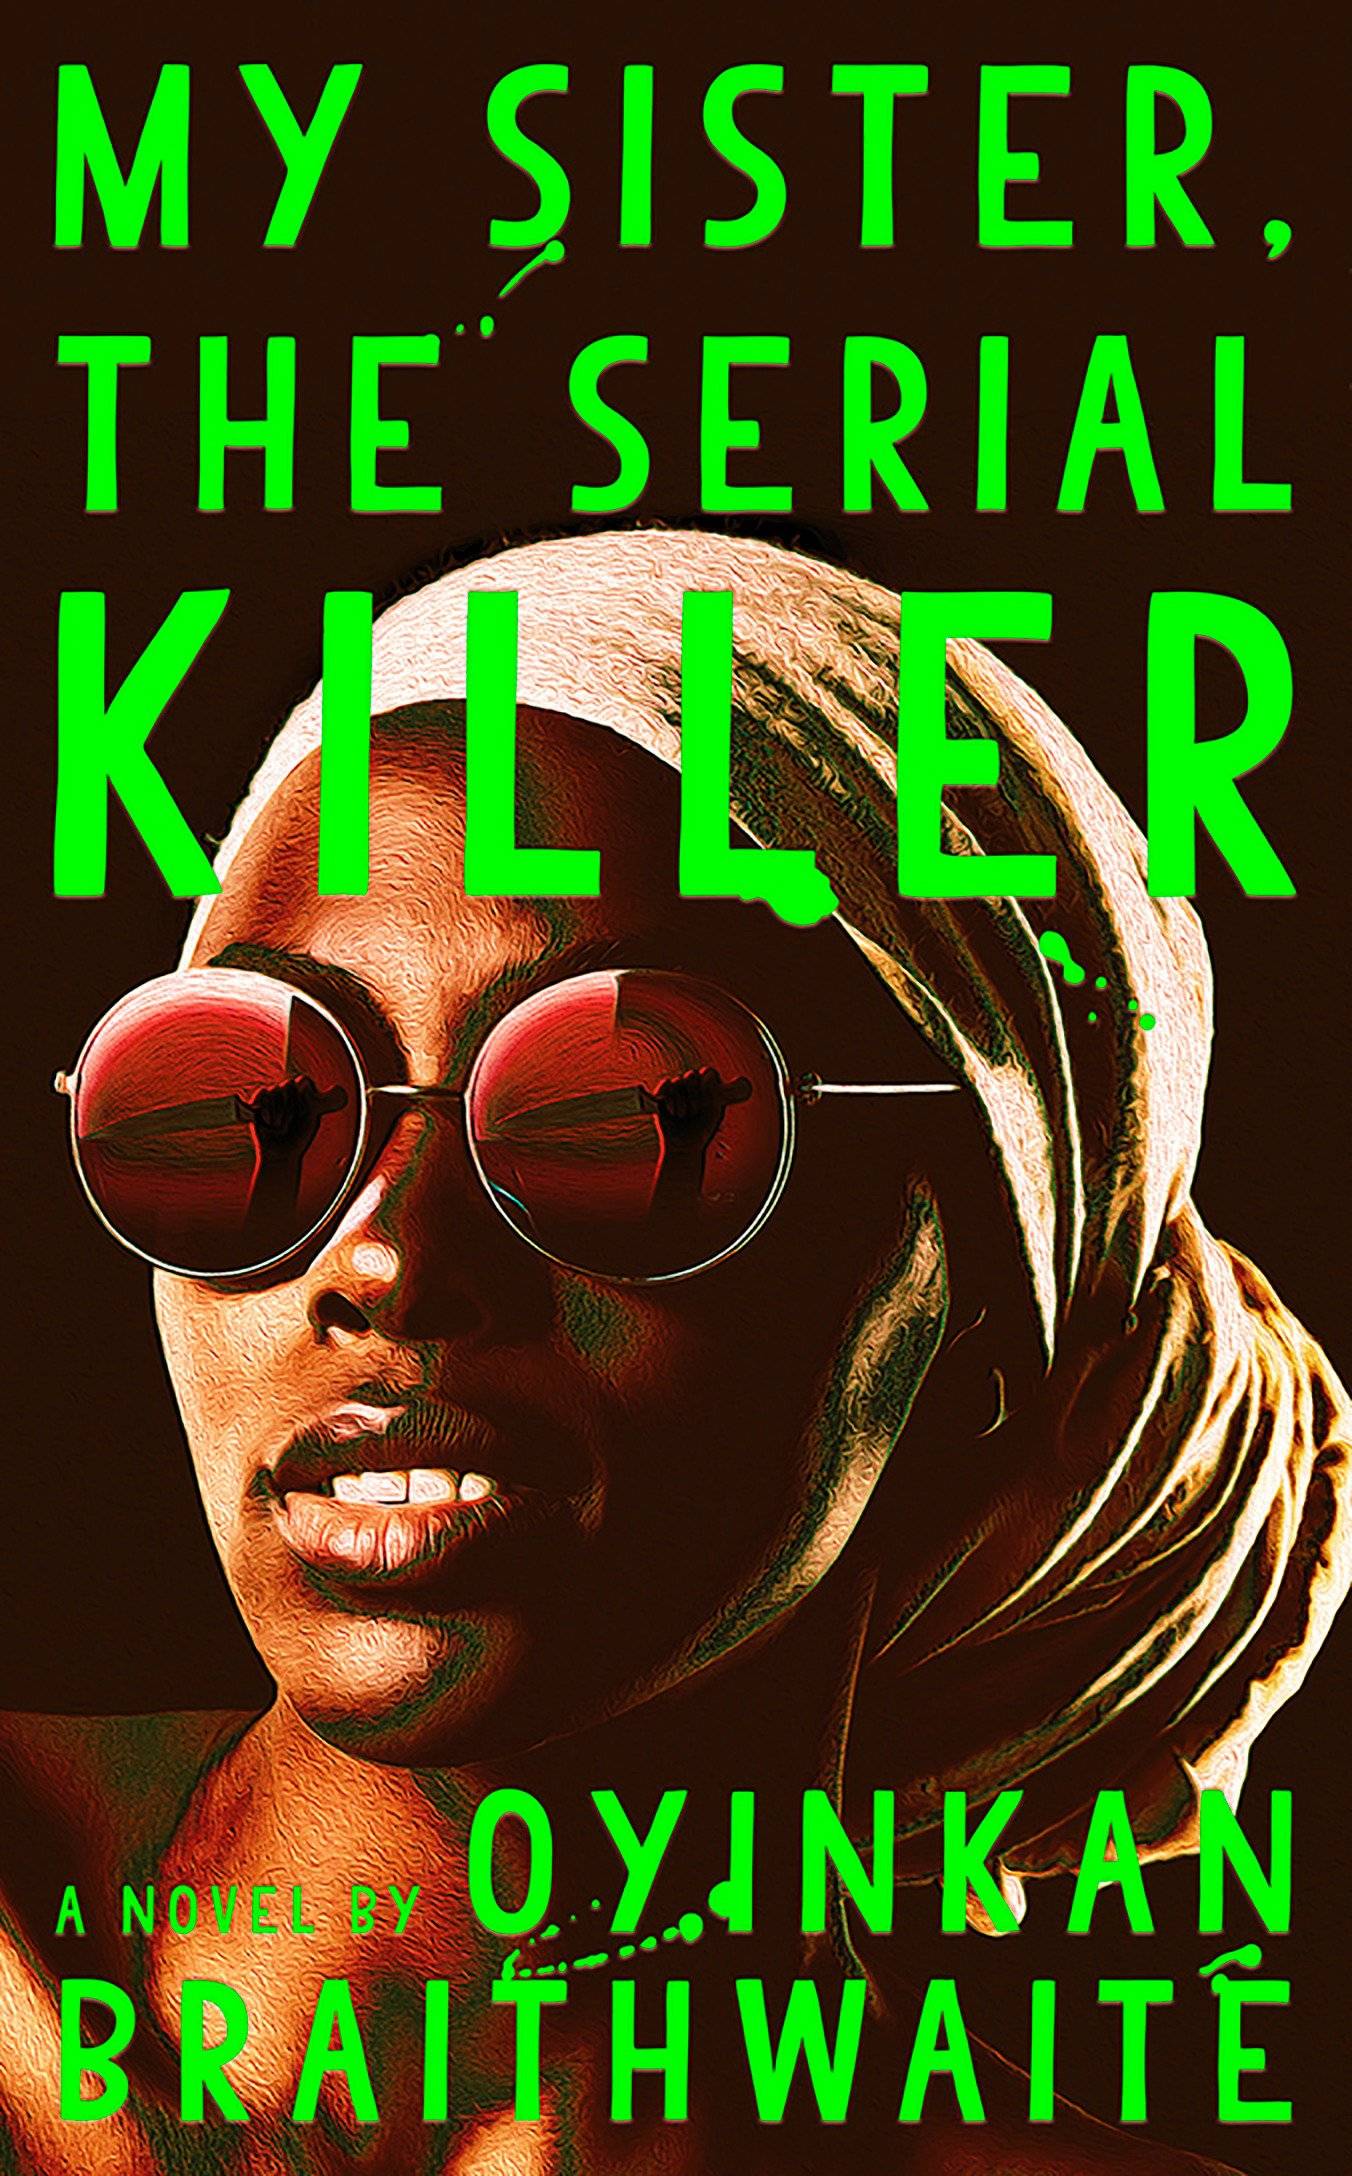 Book cover with an illustration of a woman wearing sunglasses and a knife in her hand in the reflection